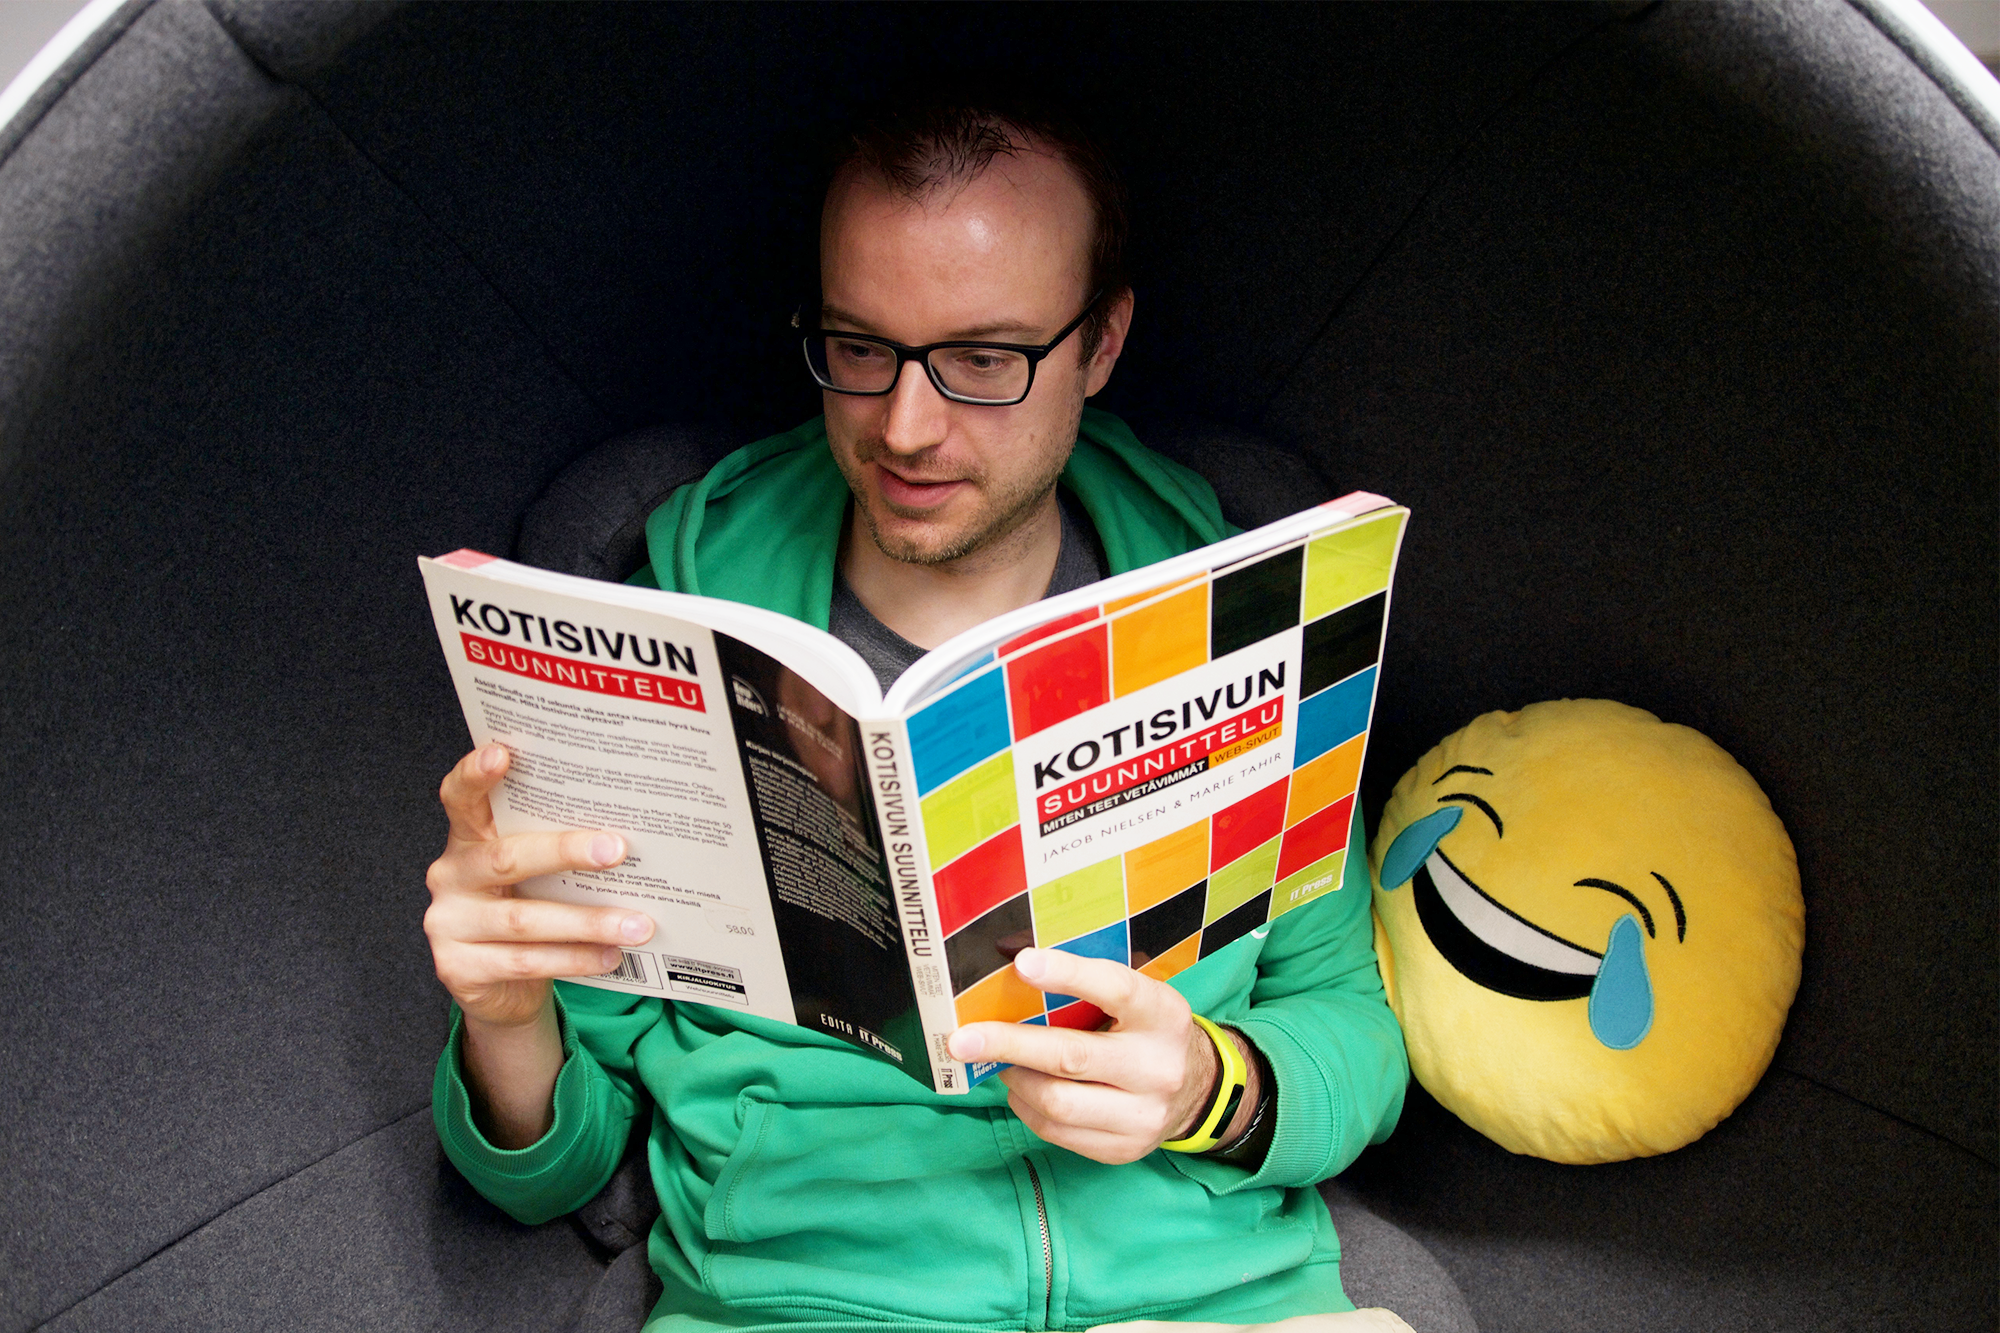 Evermade learning practices, Jaakko reading a book about web design